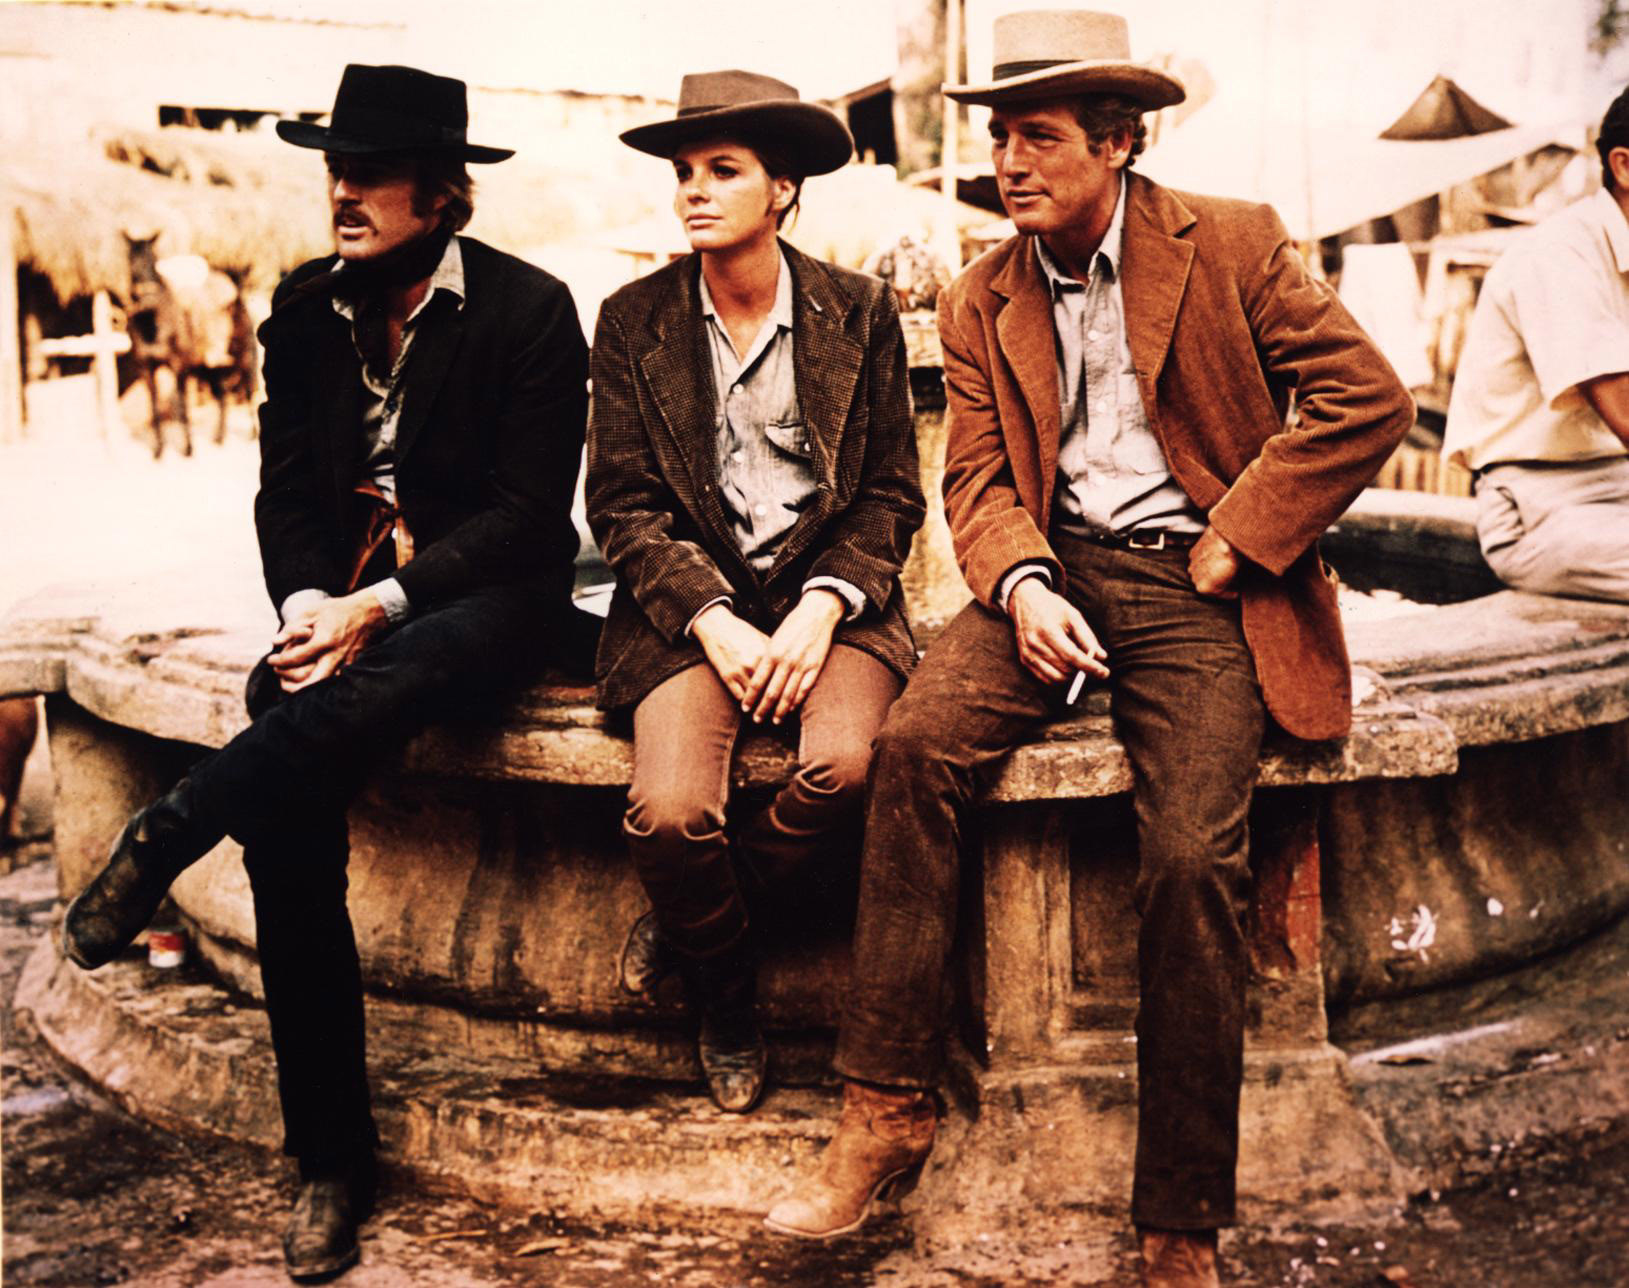 Robert Redford, Katharine Ross, and Paul Newman sit on a fountain in cowboy apparel